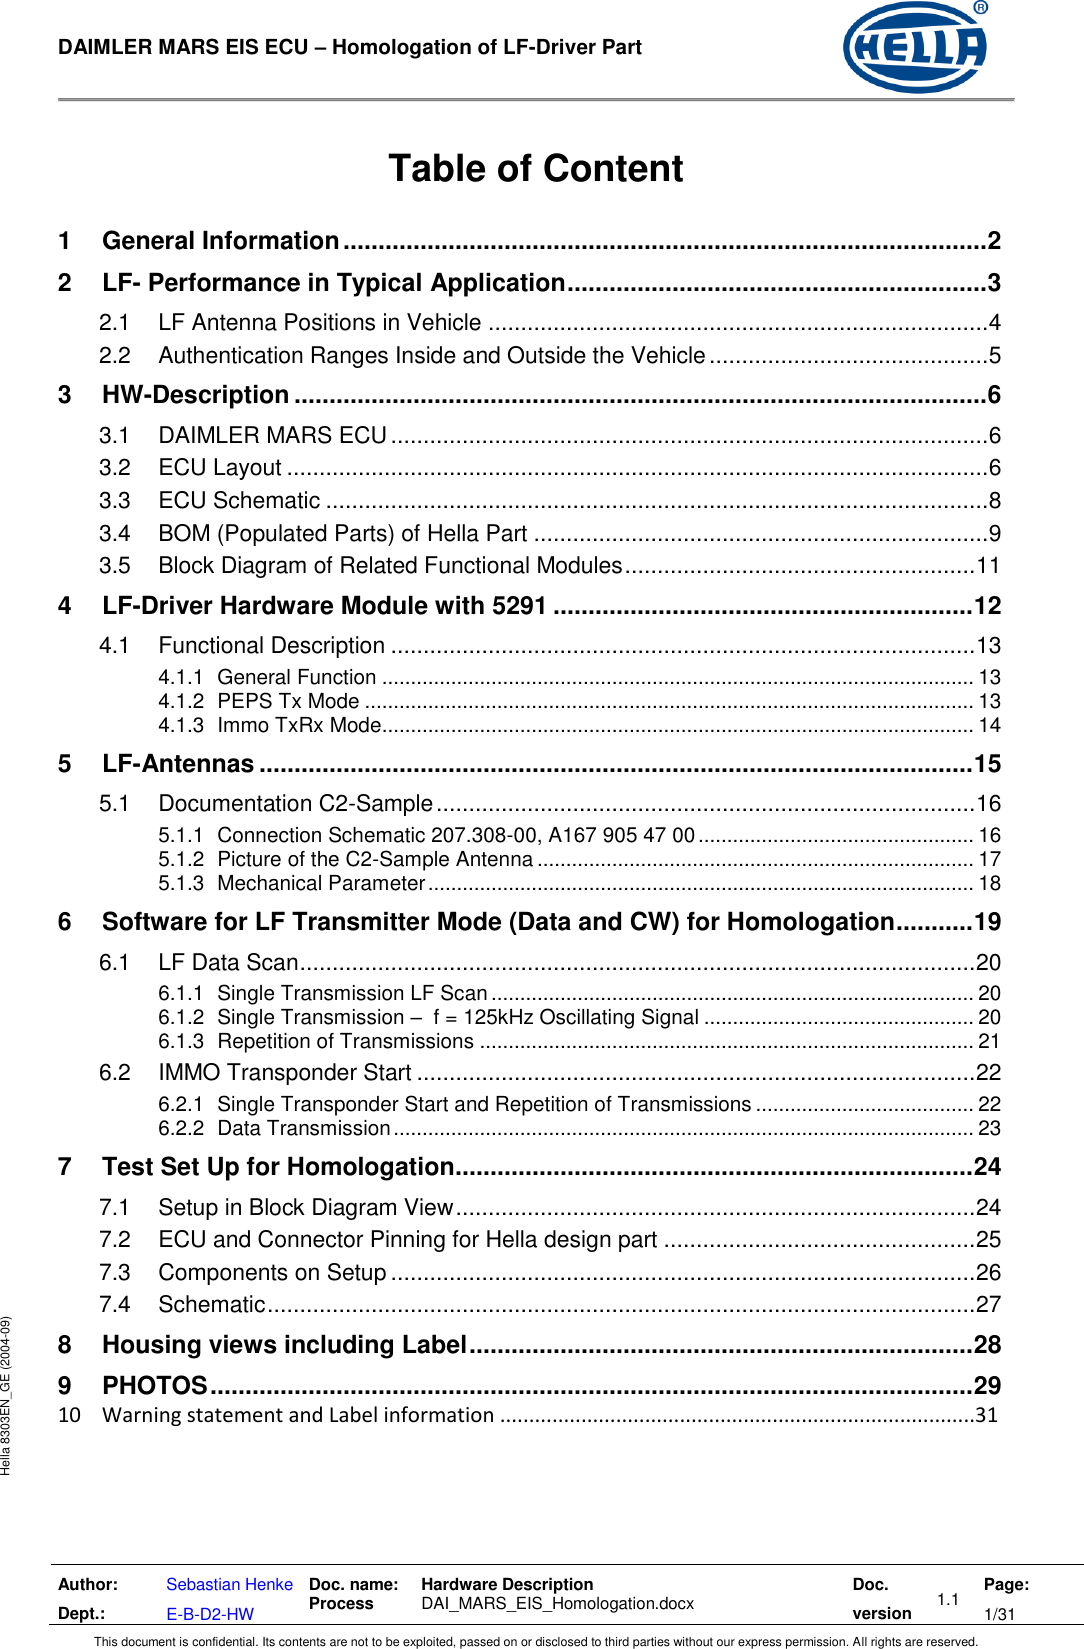  DAIMLER MARS EIS ECU – Homologation of LF-Driver Part   Author: Dept.: Sebastian Henke E-B-D2-HW Doc. name: Process Hardware Description  DAI_MARS_EIS_Homologation.docx Doc. version 1.1 Page: 1/31 This document is confidential. Its contents are not to be exploited, passed on or disclosed to third parties without our express permission. All rights are reserved. Hella 8303EN_GE (2004-09)  Table of Content  1 General Information ............................................................................................ 2 2 LF- Performance in Typical Application ............................................................ 3 2.1 LF Antenna Positions in Vehicle ............................................................................. 4 2.2 Authentication Ranges Inside and Outside the Vehicle ........................................... 5 3 HW-Description ................................................................................................... 6 3.1 DAIMLER MARS ECU ............................................................................................ 6 3.2 ECU Layout ............................................................................................................ 6 3.3 ECU Schematic ...................................................................................................... 8 3.4 BOM (Populated Parts) of Hella Part ...................................................................... 9 3.5 Block Diagram of Related Functional Modules ...................................................... 11 4 LF-Driver Hardware Module with 5291 ............................................................ 12 4.1 Functional Description .......................................................................................... 13 4.1.1 General Function ....................................................................................................... 13 4.1.2 PEPS Tx Mode .......................................................................................................... 13 4.1.3 Immo TxRx Mode....................................................................................................... 14 5 LF-Antennas ...................................................................................................... 15 5.1 Documentation C2-Sample ................................................................................... 16 5.1.1 Connection Schematic 207.308-00, A167 905 47 00 ................................................ 16 5.1.2 Picture of the C2-Sample Antenna ............................................................................ 17 5.1.3 Mechanical Parameter ............................................................................................... 18 6 Software for LF Transmitter Mode (Data and CW) for Homologation ........... 19 6.1 LF Data Scan ........................................................................................................ 20 6.1.1 Single Transmission LF Scan .................................................................................... 20 6.1.2 Single Transmission –  f = 125kHz Oscillating Signal ............................................... 20 6.1.3 Repetition of Transmissions ...................................................................................... 21 6.2 IMMO Transponder Start ...................................................................................... 22 6.2.1 Single Transponder Start and Repetition of Transmissions ...................................... 22 6.2.2 Data Transmission ..................................................................................................... 23 7 Test Set Up for Homologation .......................................................................... 24 7.1 Setup in Block Diagram View ................................................................................ 24 7.2 ECU and Connector Pinning for Hella design part ................................................ 25 7.3 Components on Setup .......................................................................................... 26 7.4 Schematic ............................................................................................................. 27 8 Housing views including Label ........................................................................ 28 9 PHOTOS ............................................................................................................. 29 10    Warning statement and Label information ..................................................................................31 